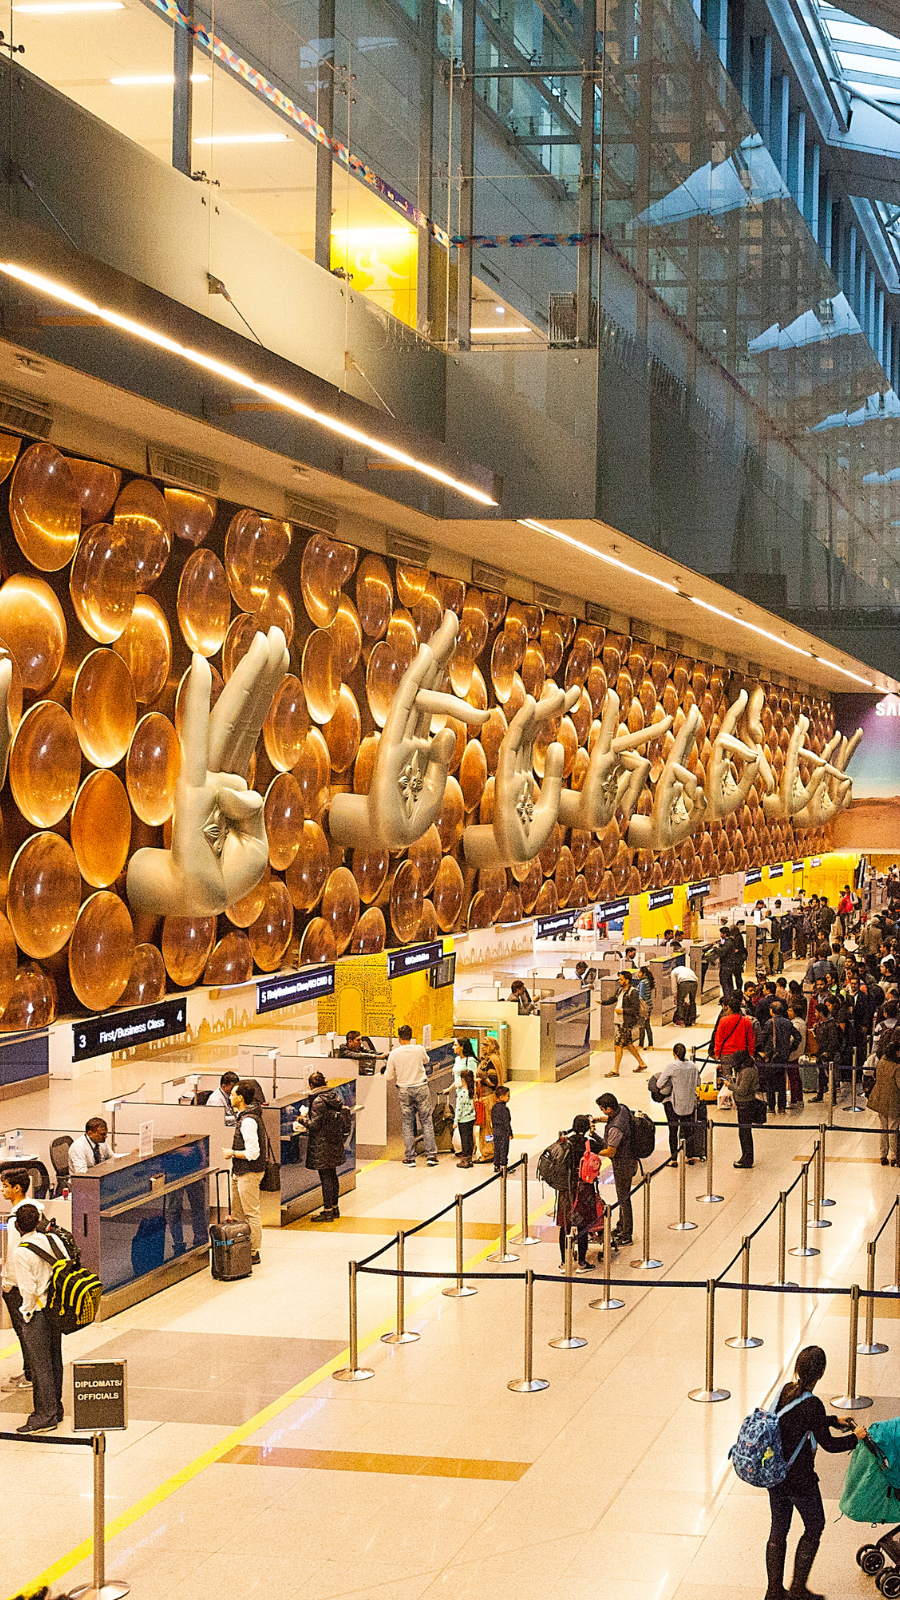 Four airports in India among world top 100. See the top 5